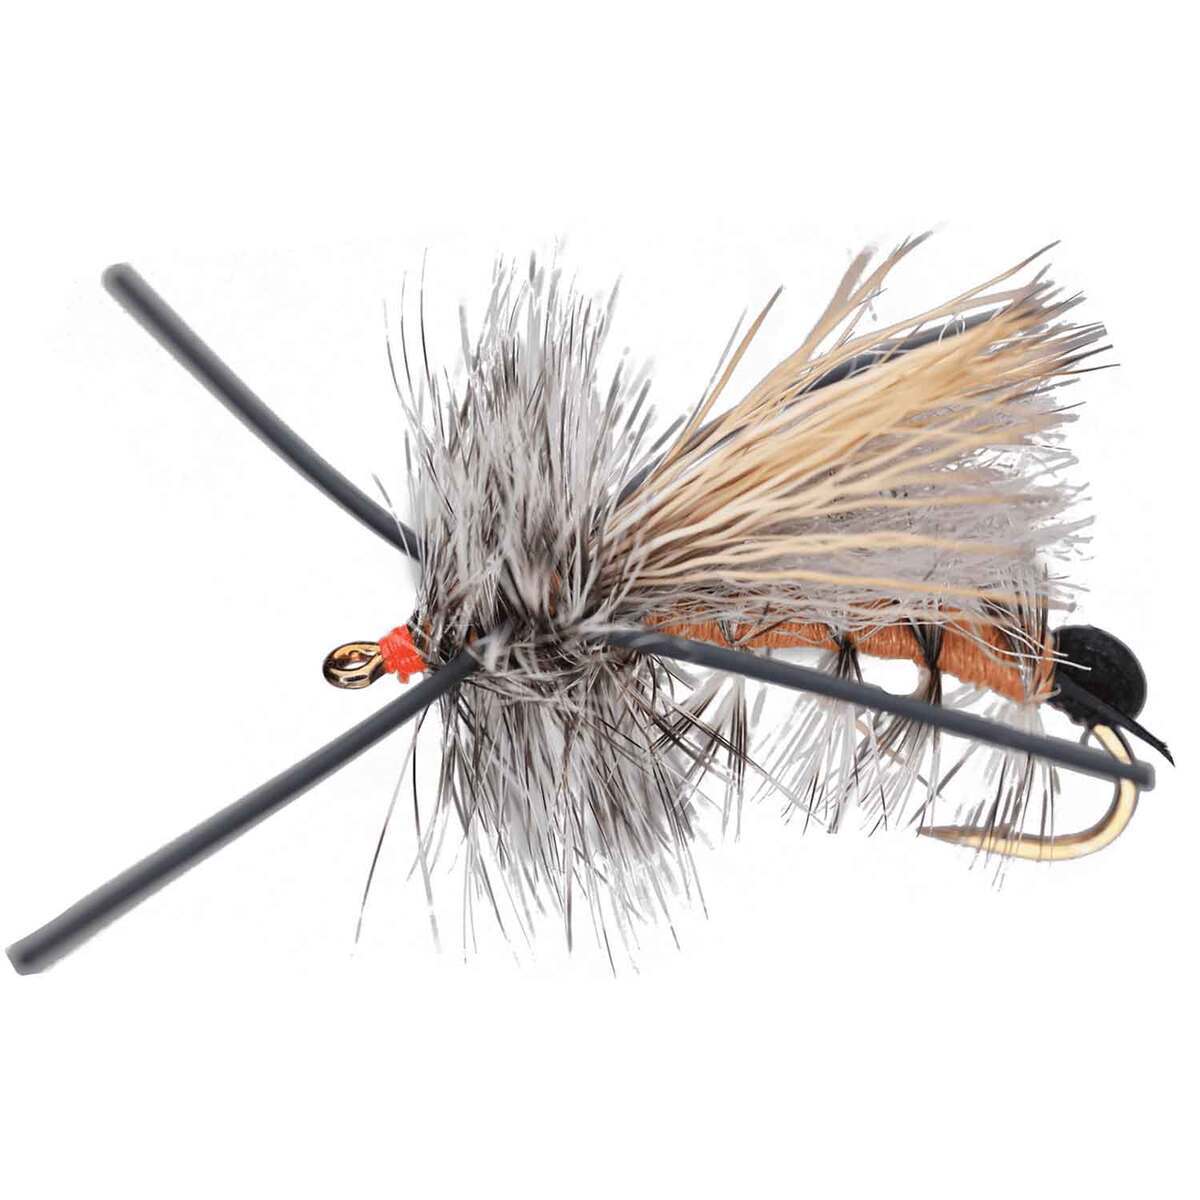 RoundRocks Terranasty Salmonfly Fly - 6 Pack - Brown 6 by Sportsman's Warehouse